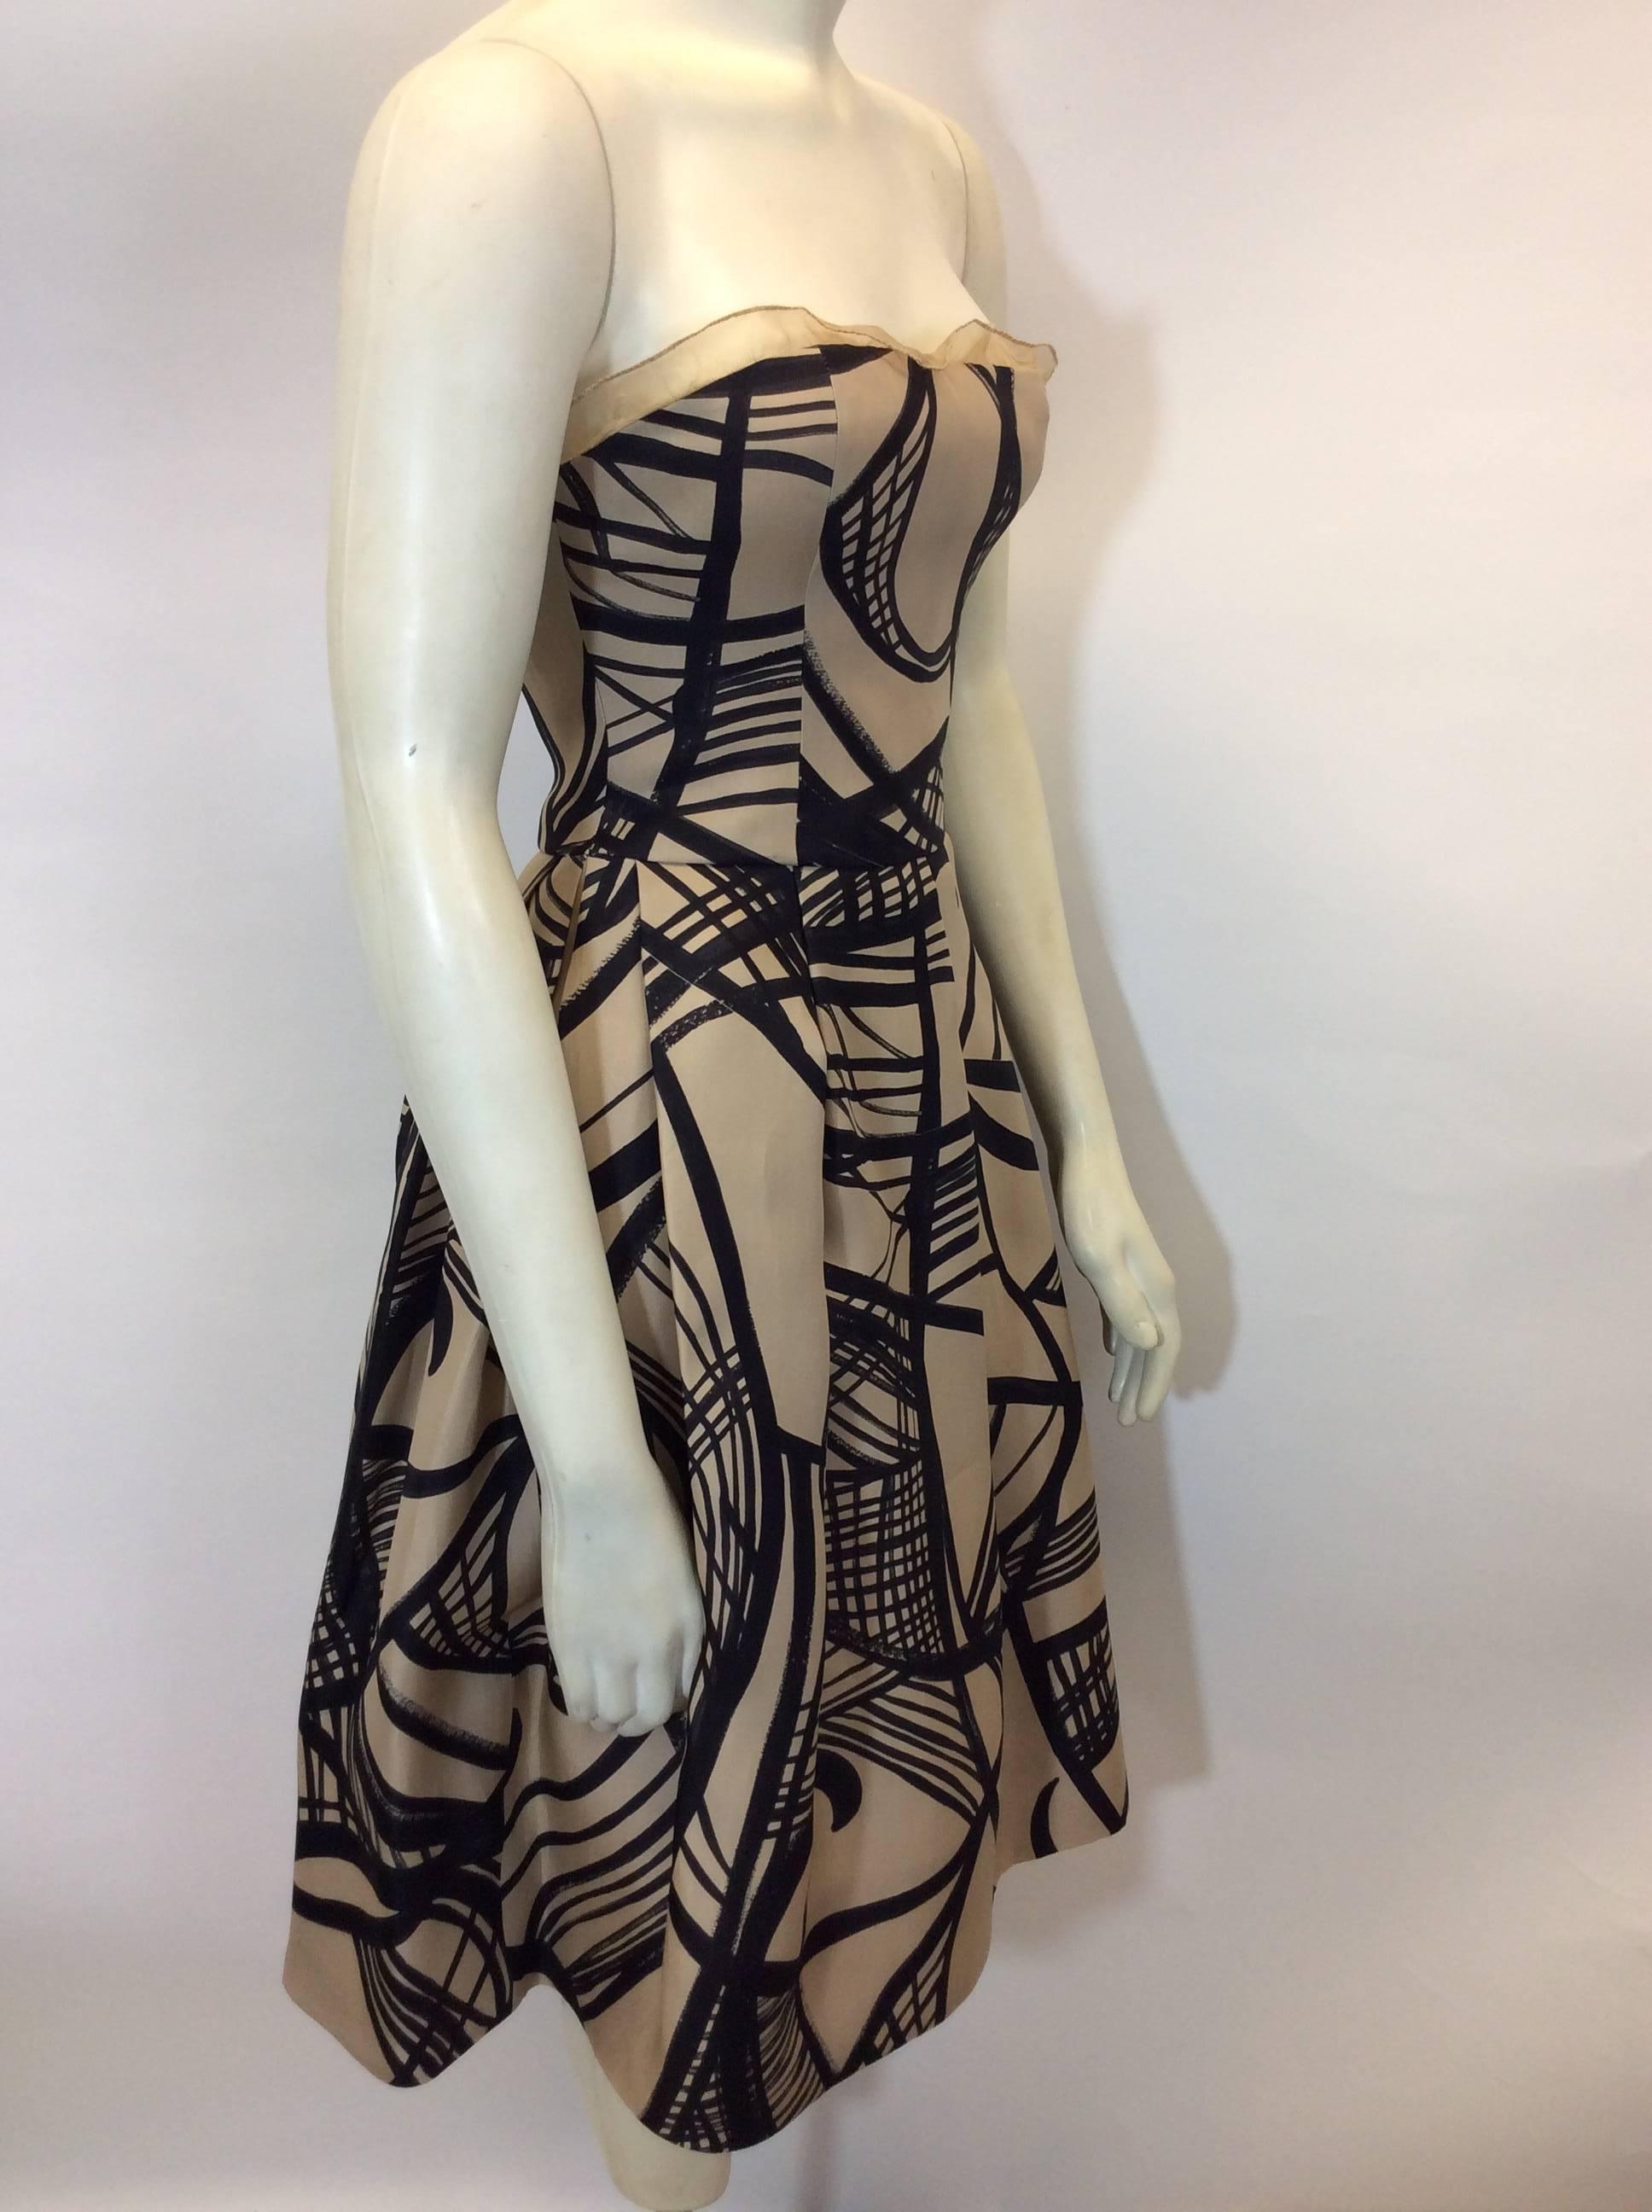 Giambattista Valli Cream and Black Printed Strapless Cocktail Dress In New Condition For Sale In Narberth, PA